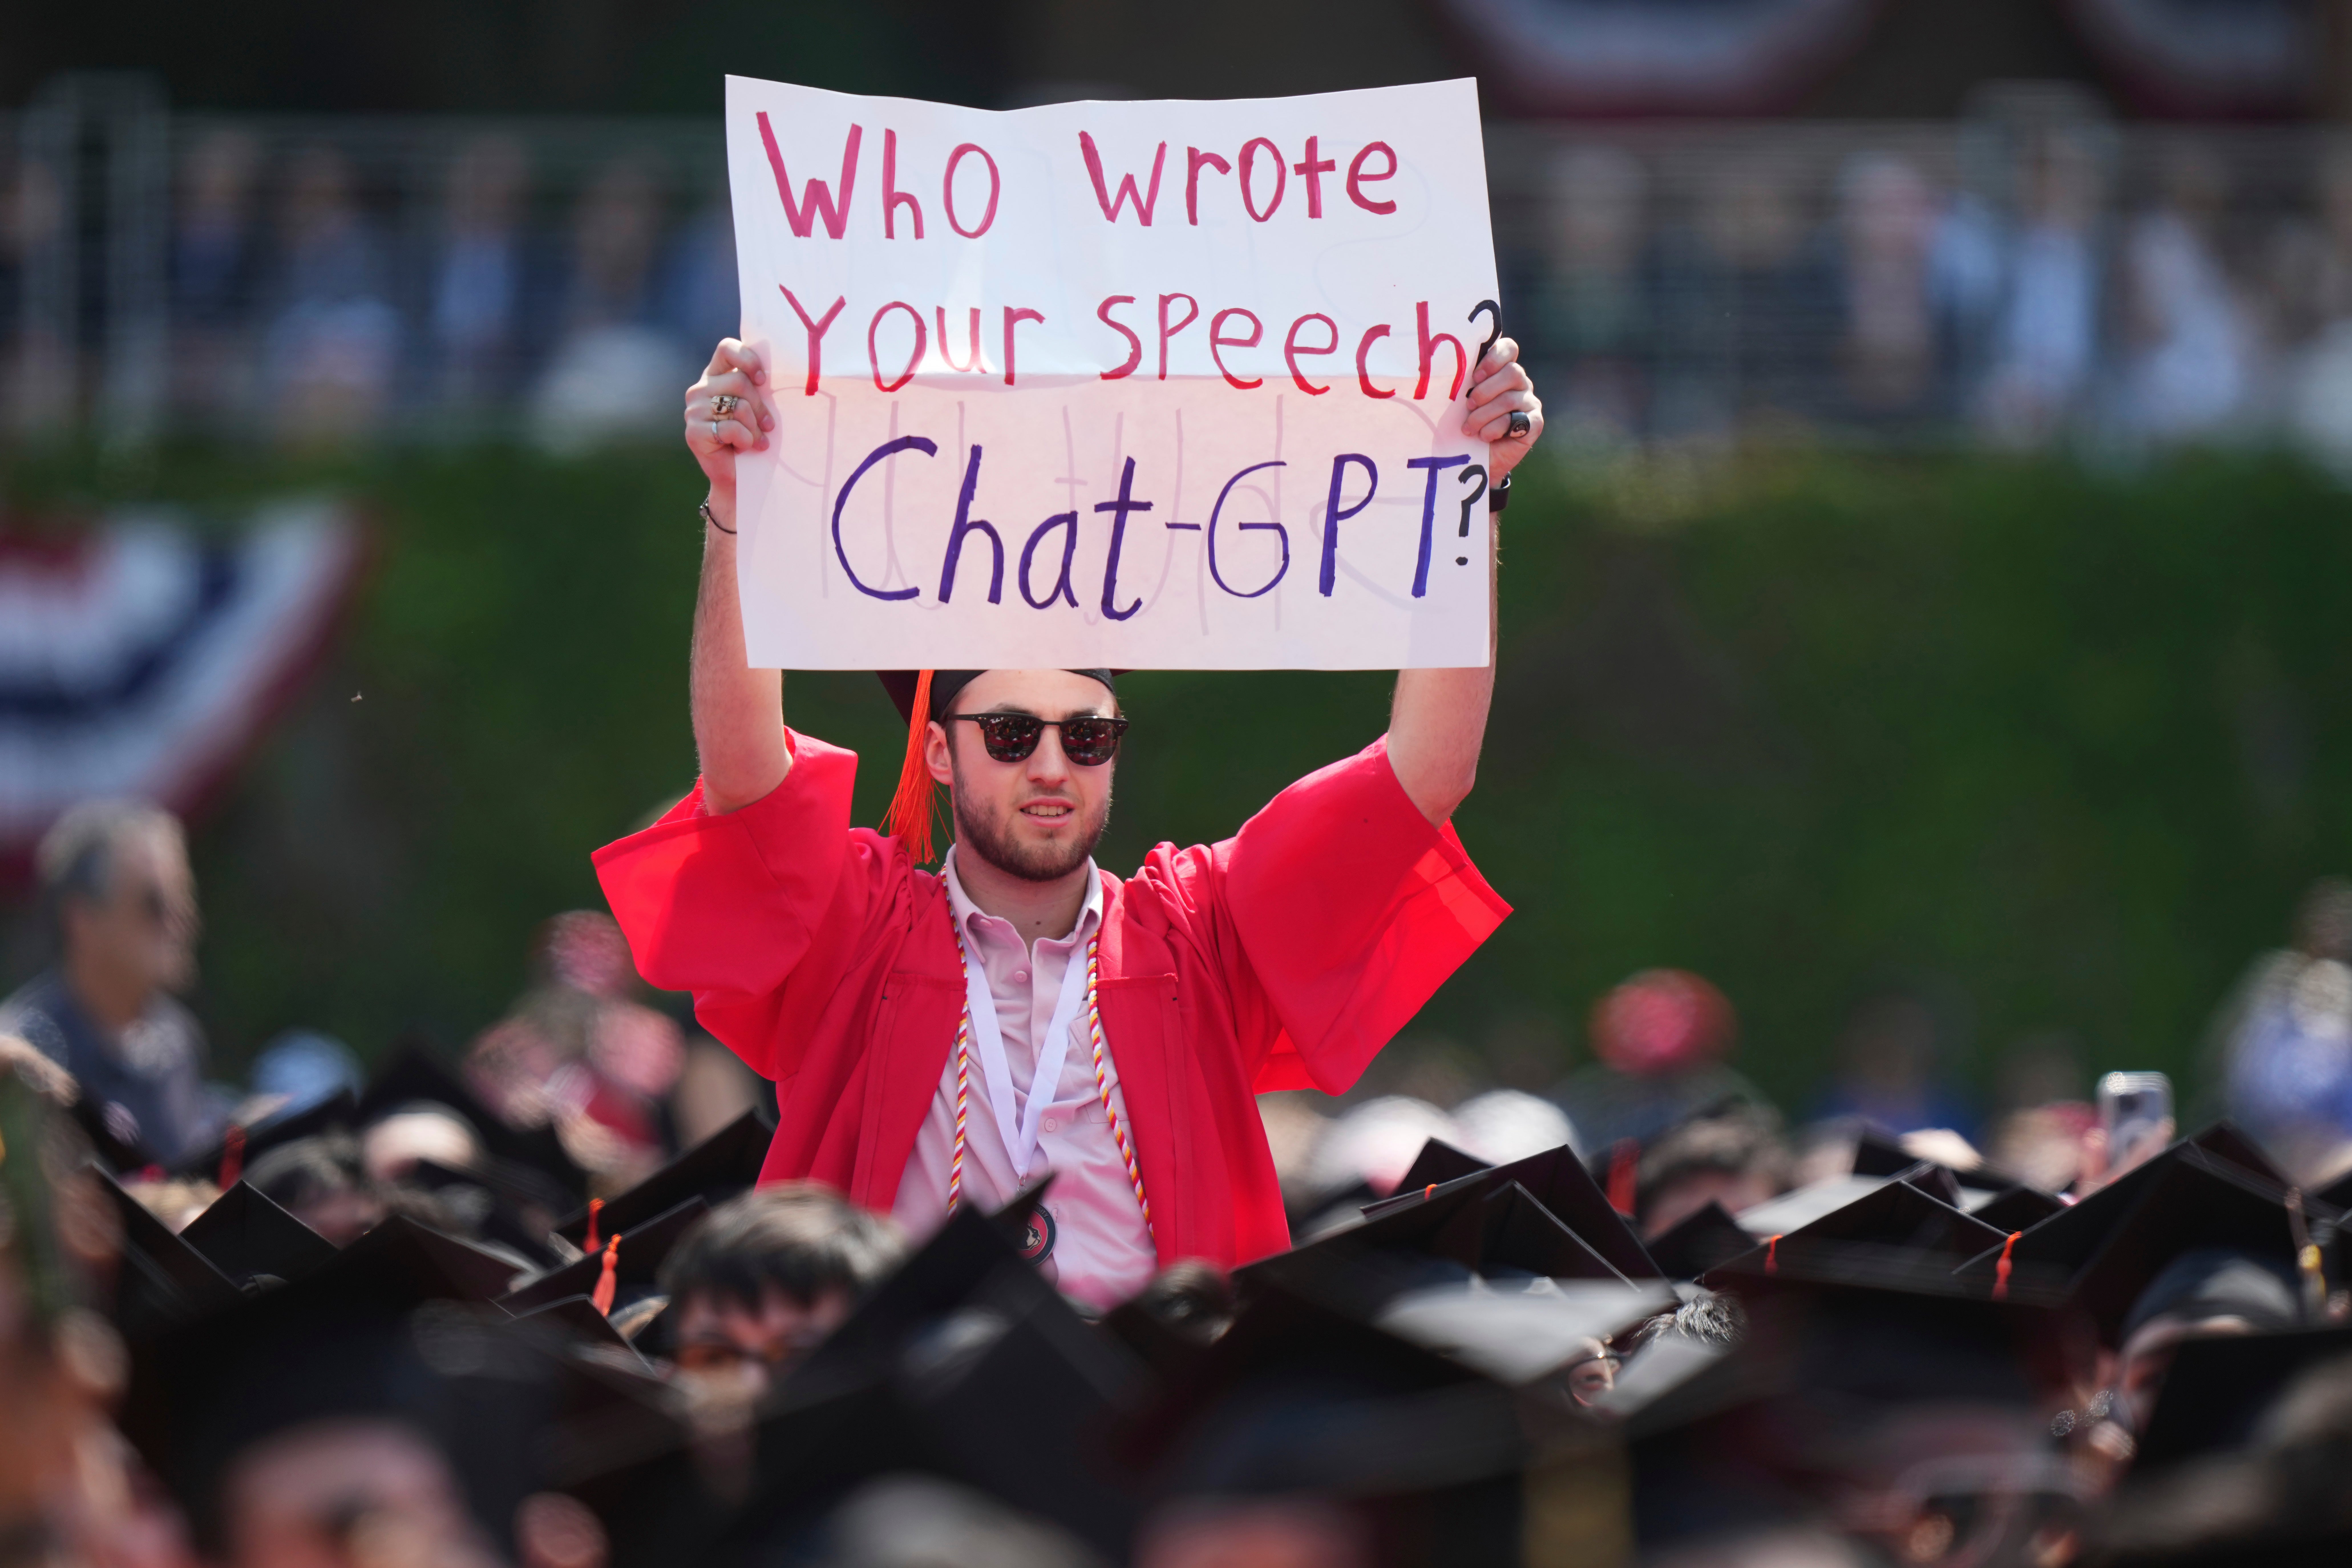 A protester holds a sign during an address by Zaslav at a Boston University commencement ceremony in May